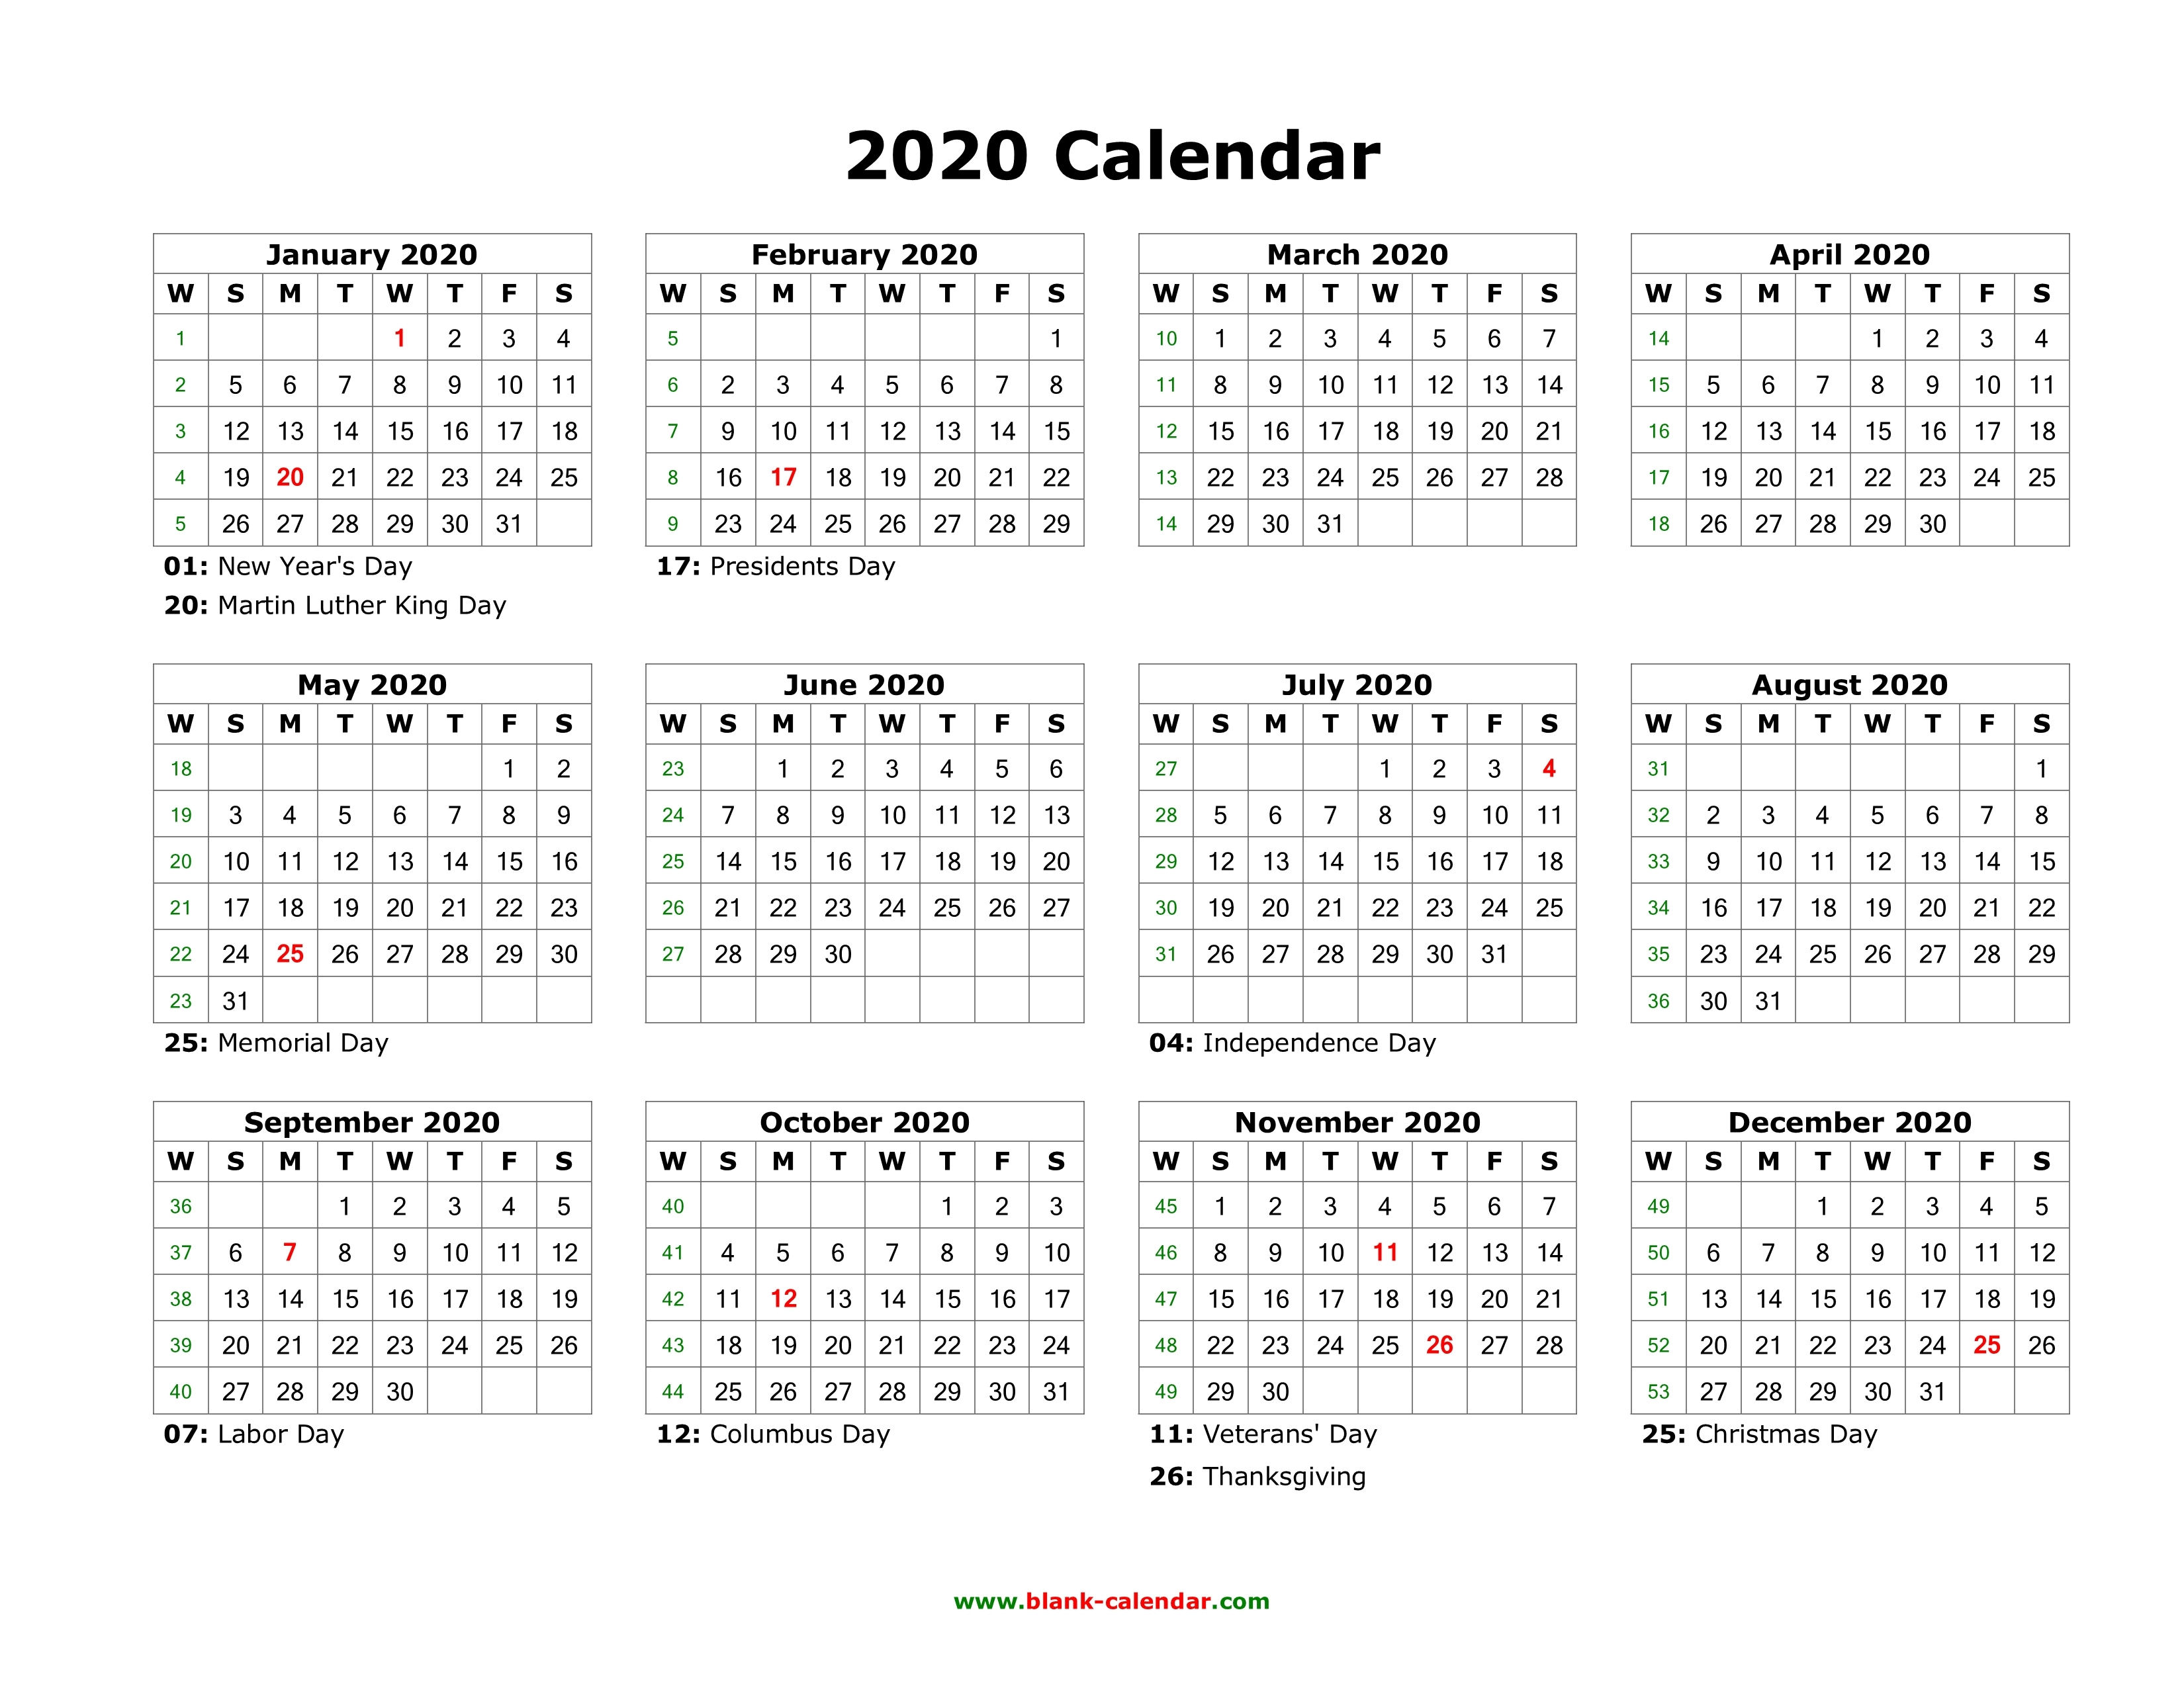 Download Blank Calendar 2020 With Us Holidays 12 Months On